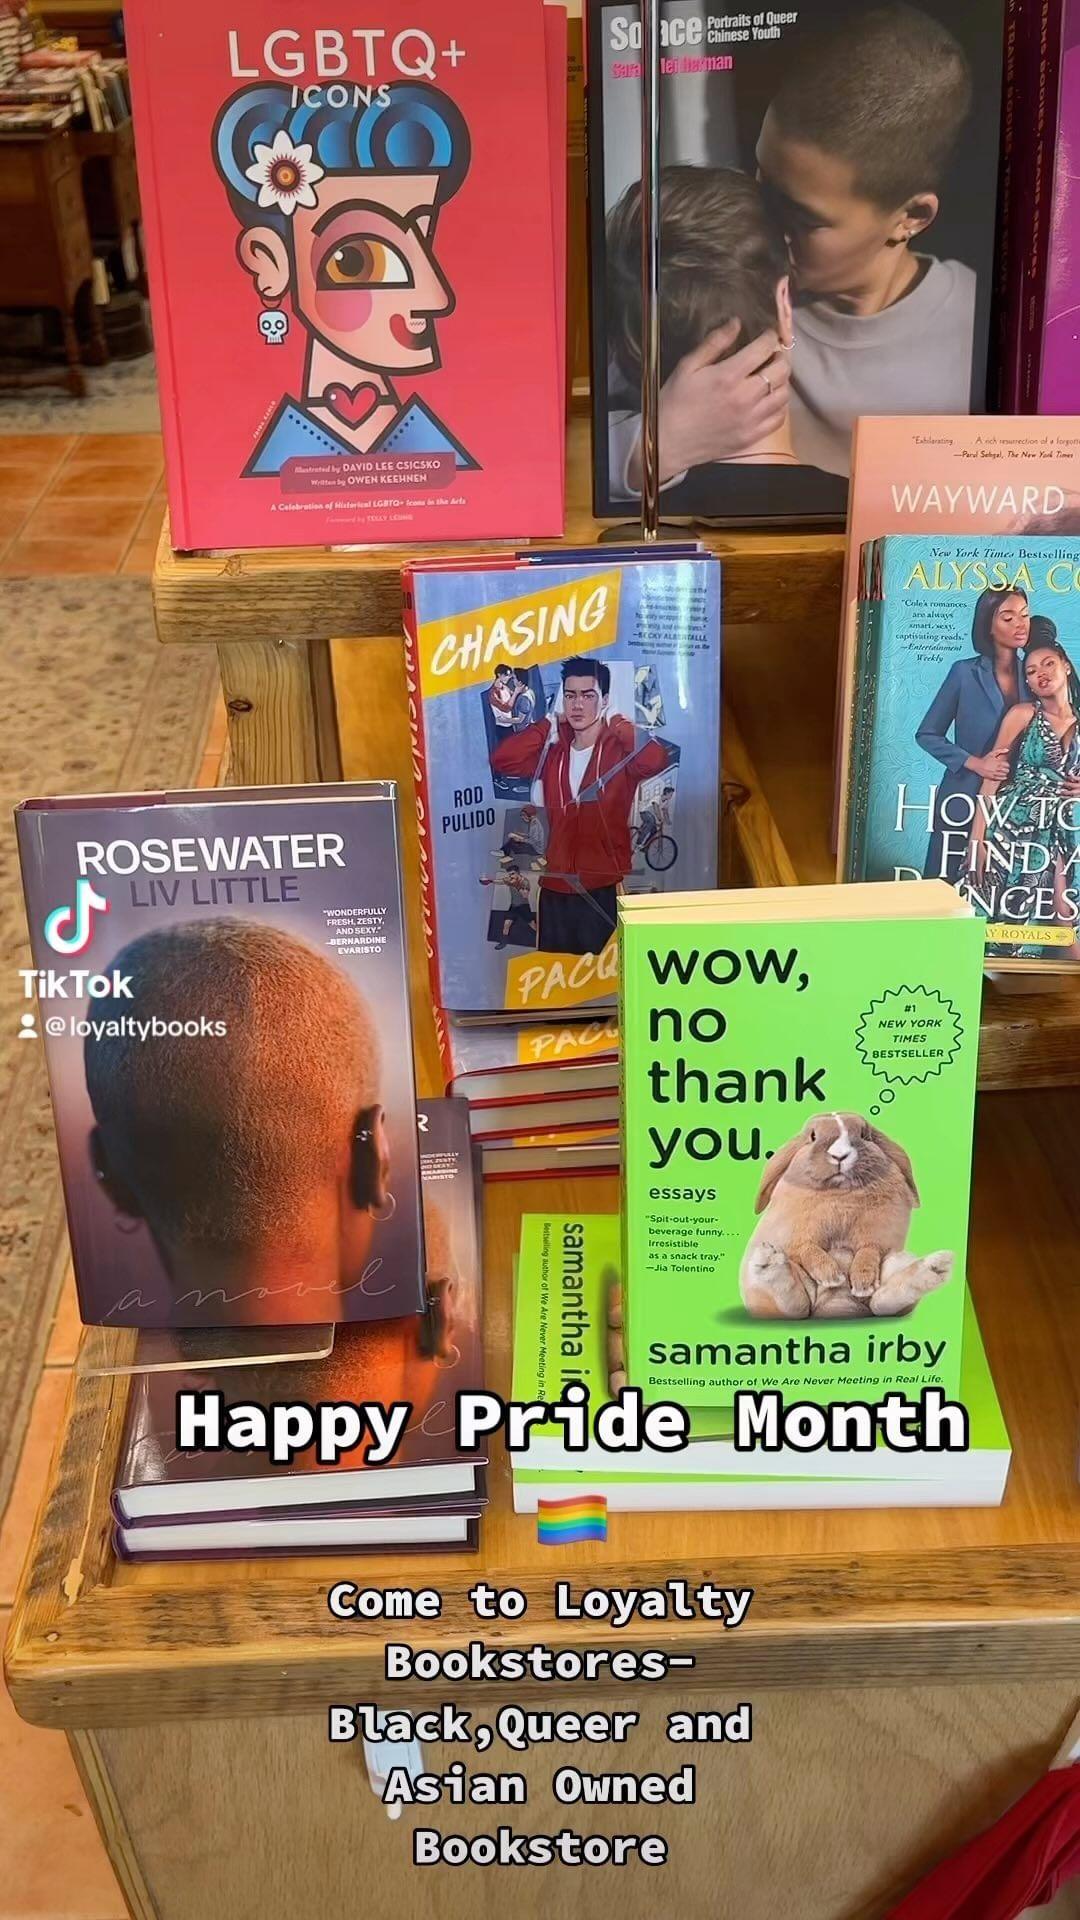 class="content__text"
 Happy Pride Month🏳️‍🌈 from the Loyalty Team!
We are emphasizing the importance of Pride even more than usual! Come shop Loyalty for our favorite LGBTQIA stories, authors, artwork, cookbooks and kids books! 
 #loyaltybookstores #queerownedbusiness #blackownedbusiness #asianownedbusiness 
 